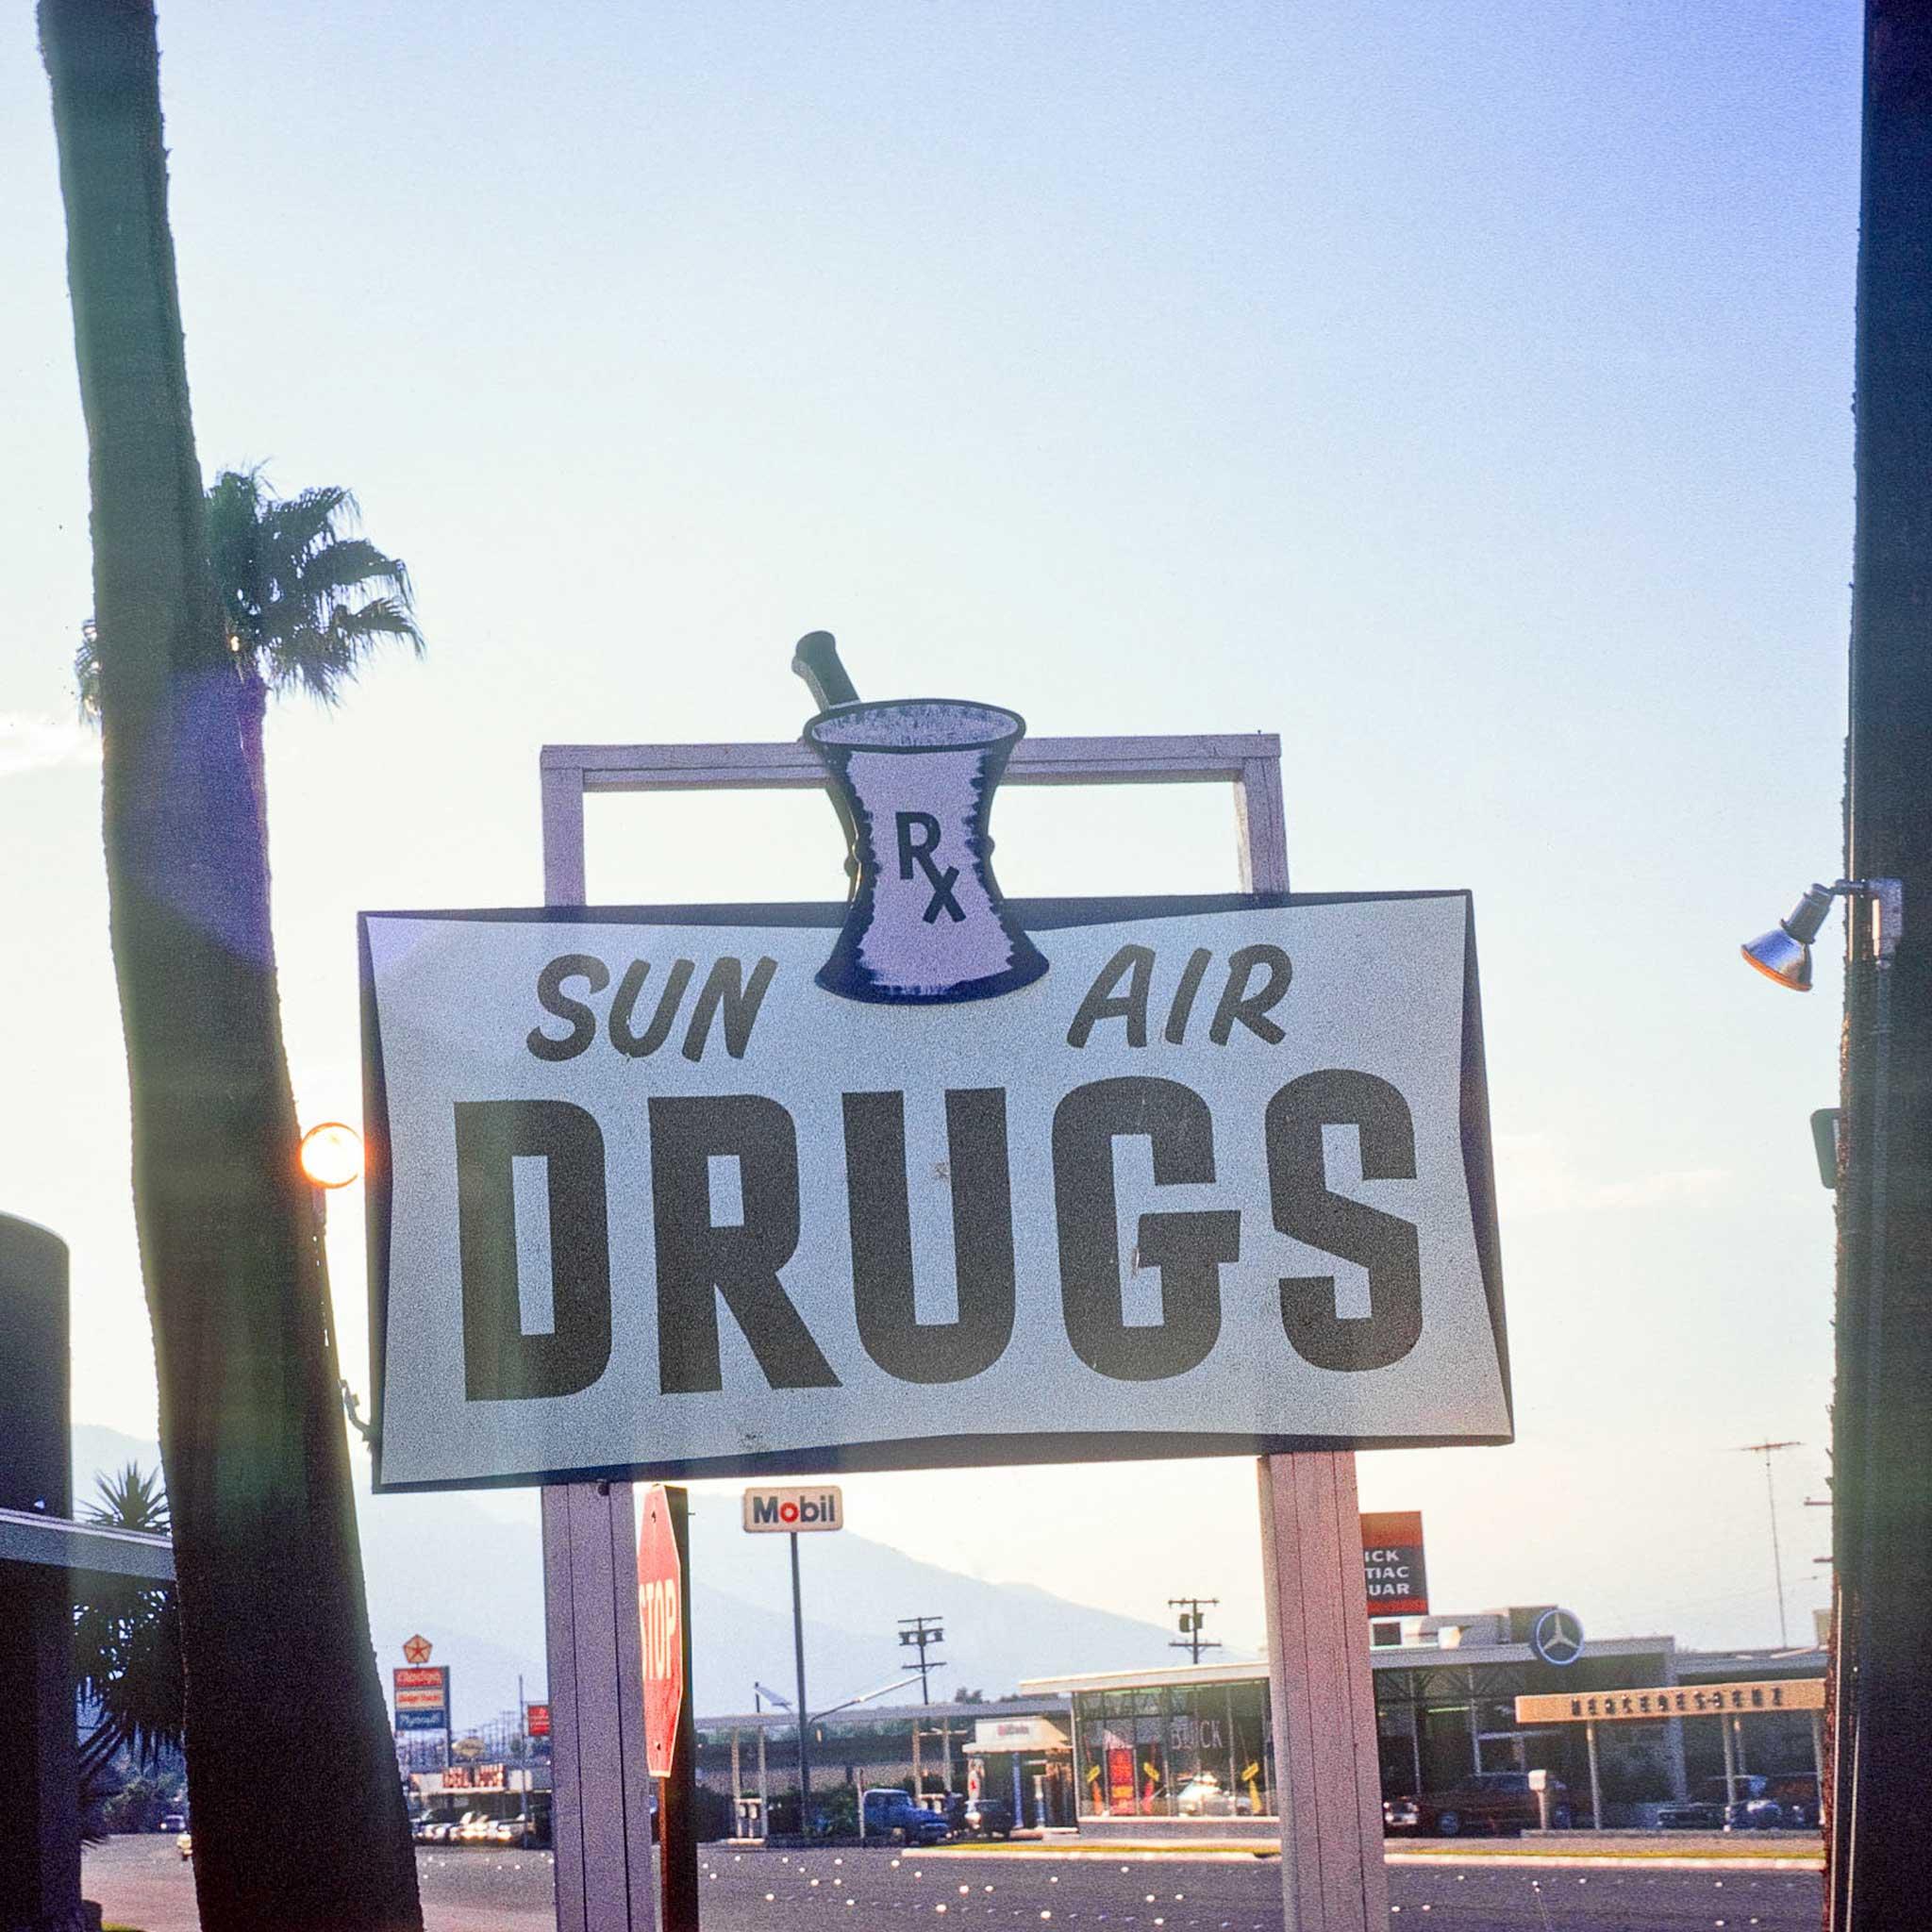 A sign that says "Sun Air Drugs" with a blue sky and palm trees in the background